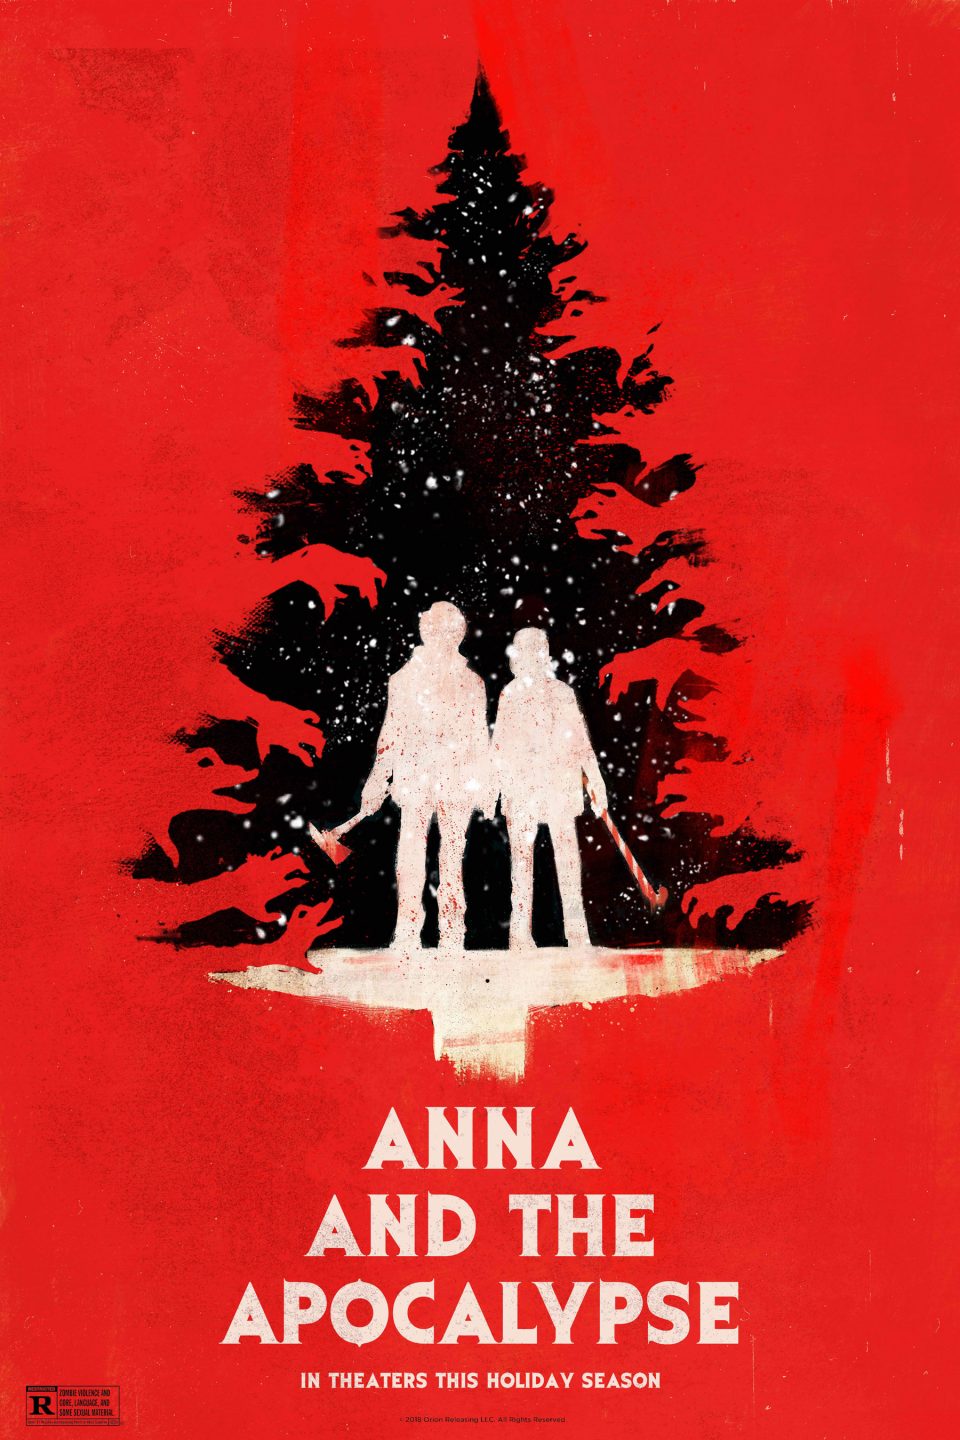 Anna And The Apocalypse poster (Orion Pictures)